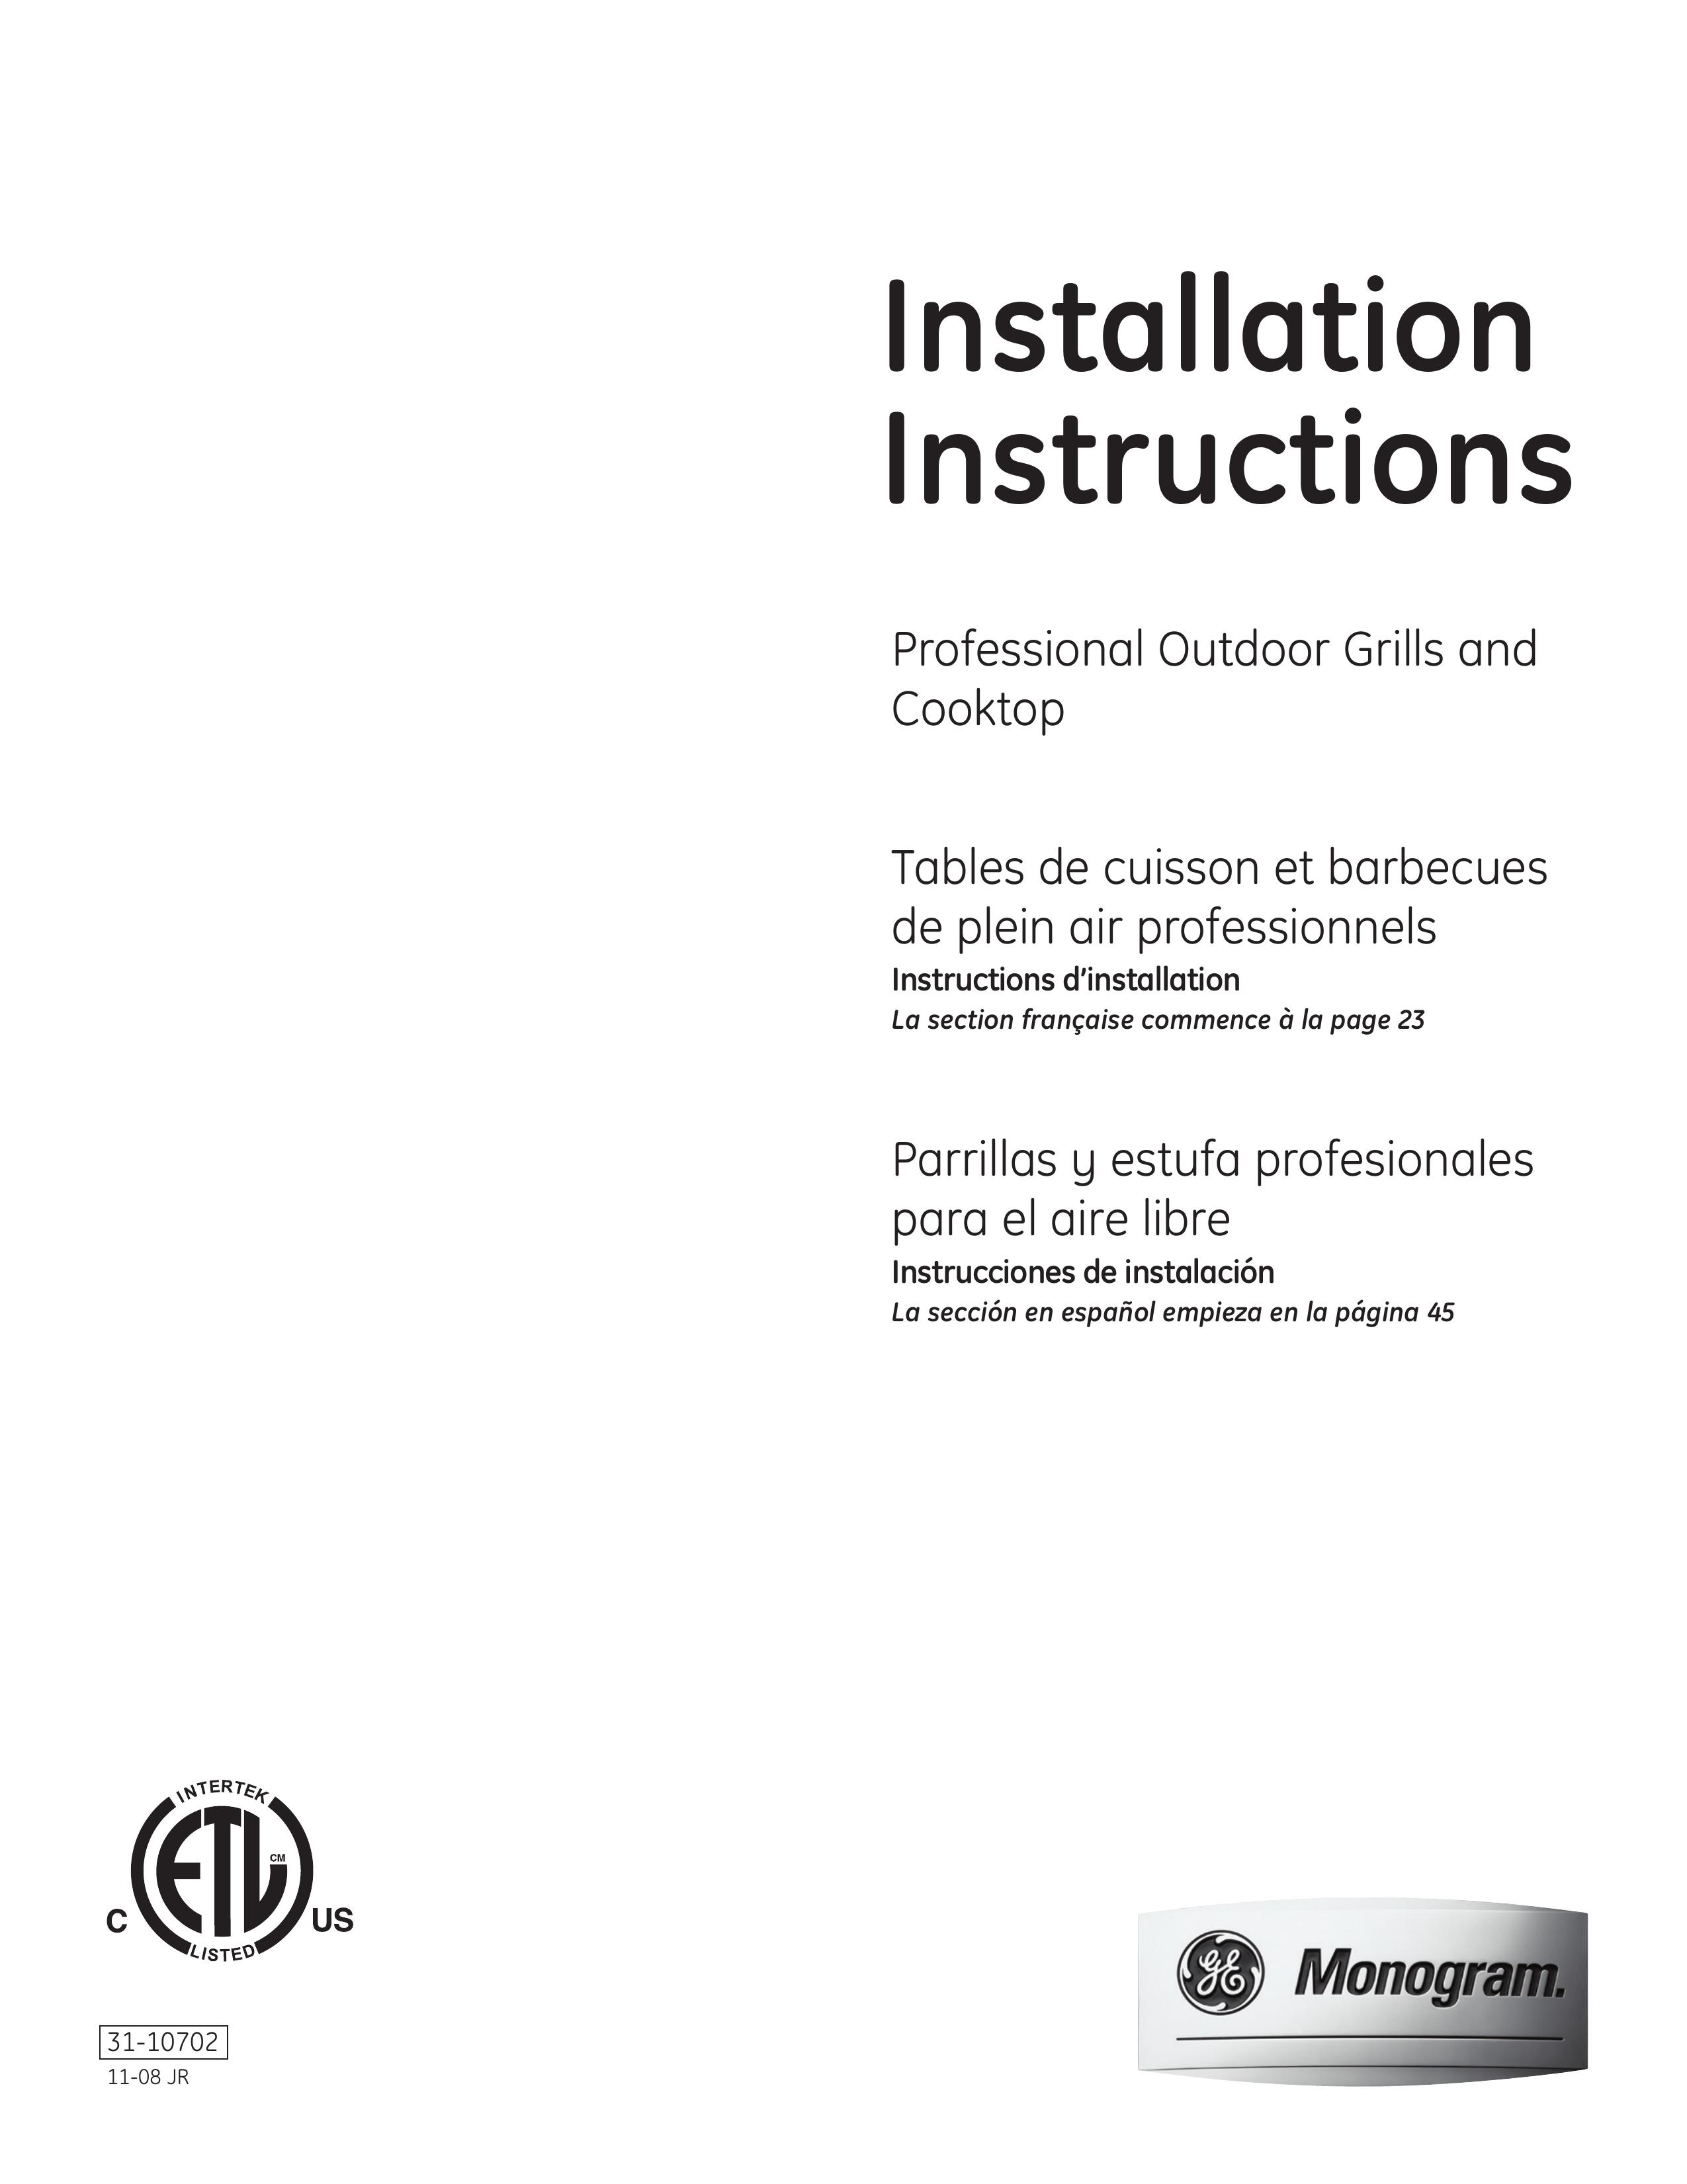 GE Monogram Professional Outdoor Grills and Cooktop Gas Grill User Manual